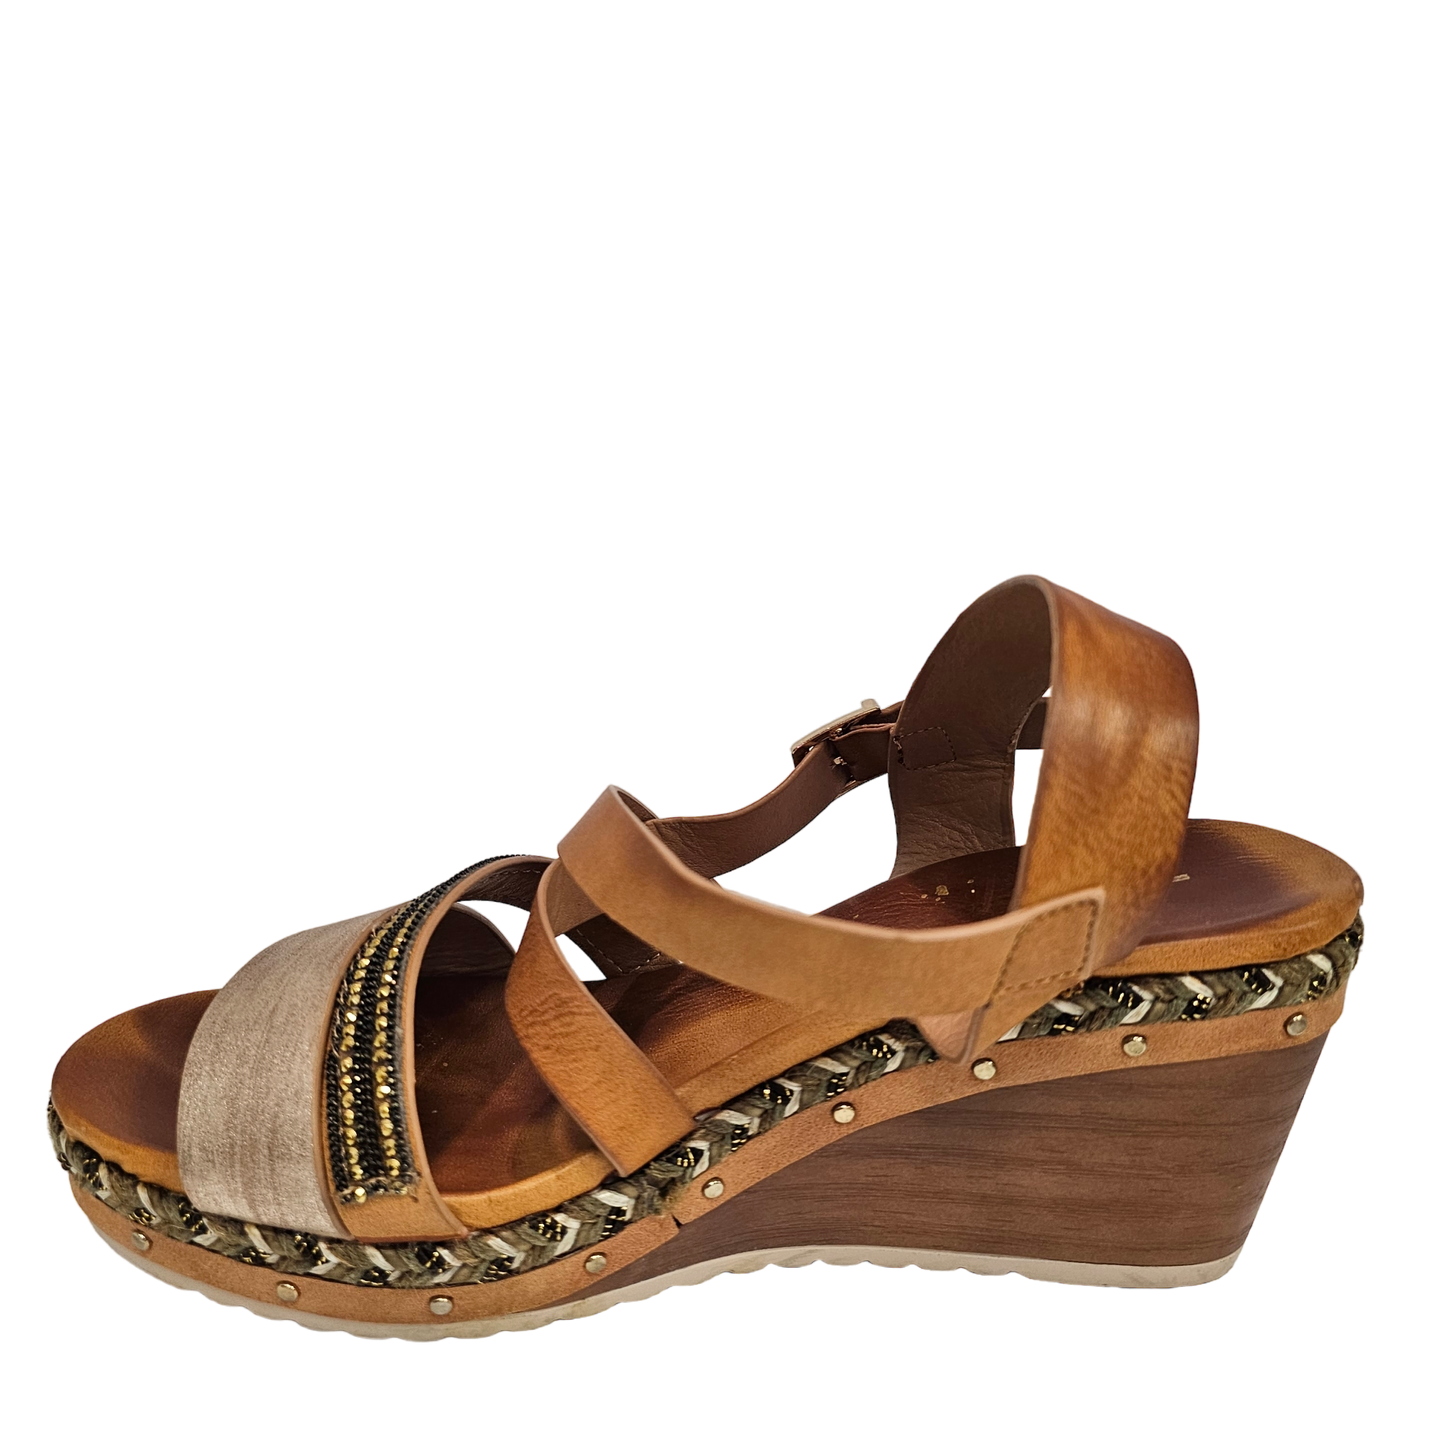 Sandals Heels Wedge By Bakers Shoes  Size: 7